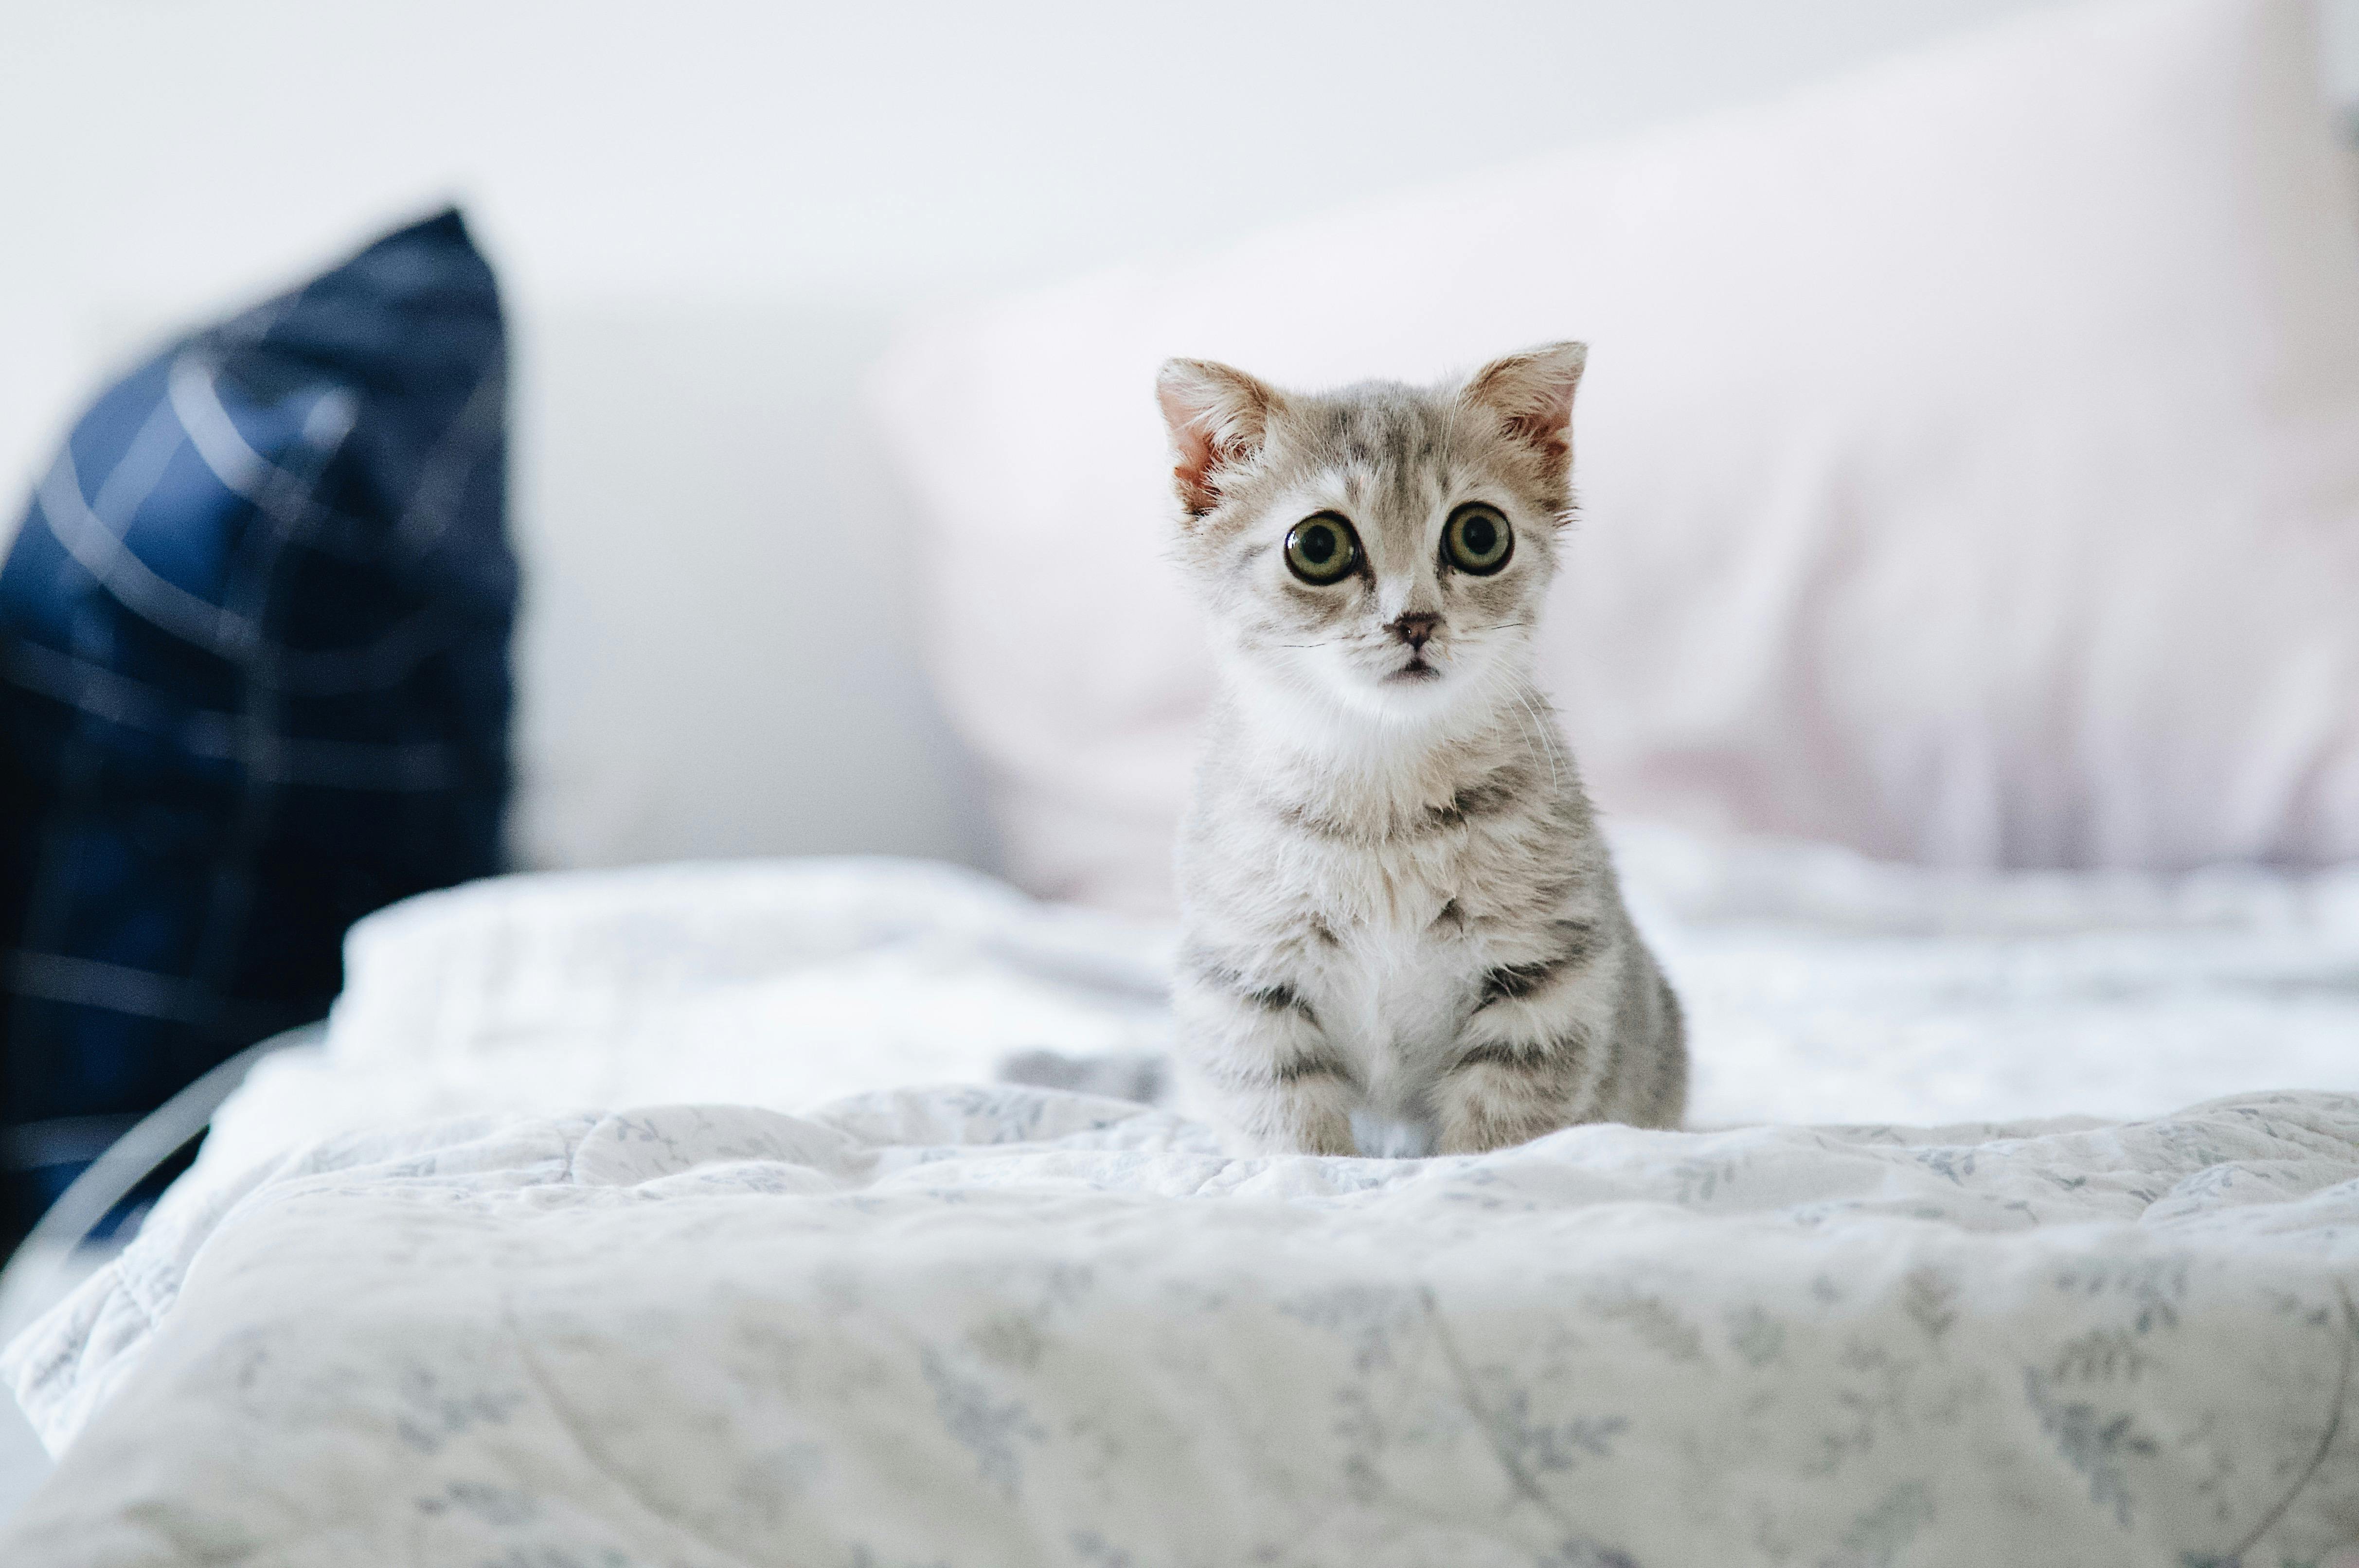 Cute Cat Photos, Download The BEST Free Cute Cat Stock Photos & HD Images